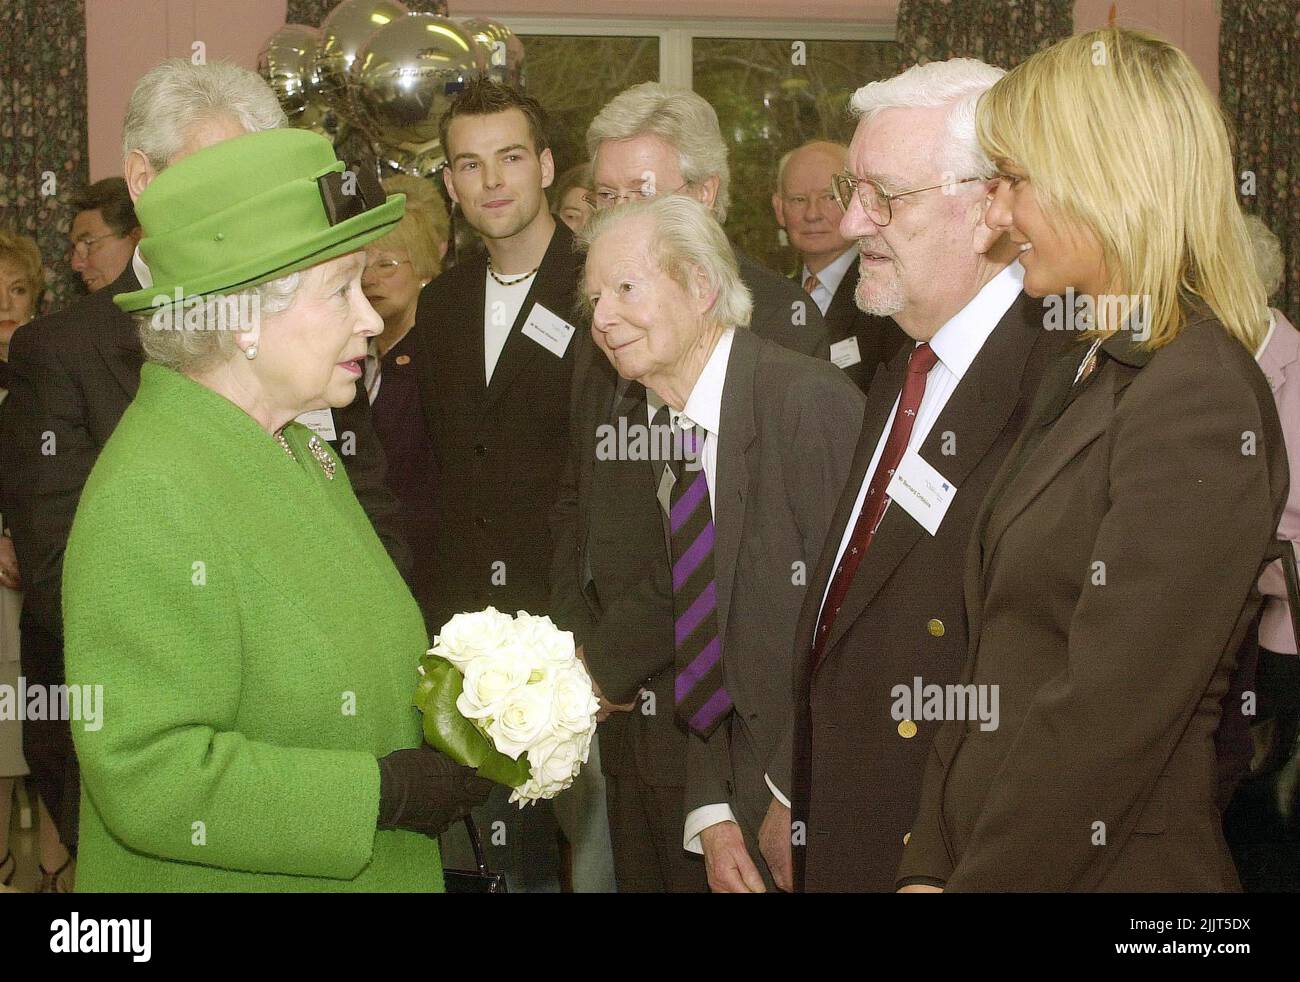 File photo dated 19/03/04 of Queen Elizabeth II, at the Children's Trust, Tadworth, Surrey, where she greeted a line-up of celebrities including, TV presenter Michael Aspel, Illustrator, Tony Hart, Actor Bernard Cribbins (second right) and former contestant of I'm a Celebrity, and Alex Best. Veteran actor Bernard Cribbins, who narrated The Wombles and starred in the film adaptation of The Railway Children, has died aged 93, his agent said. Issue date: Thursday July 28, 2022. Stock Photo